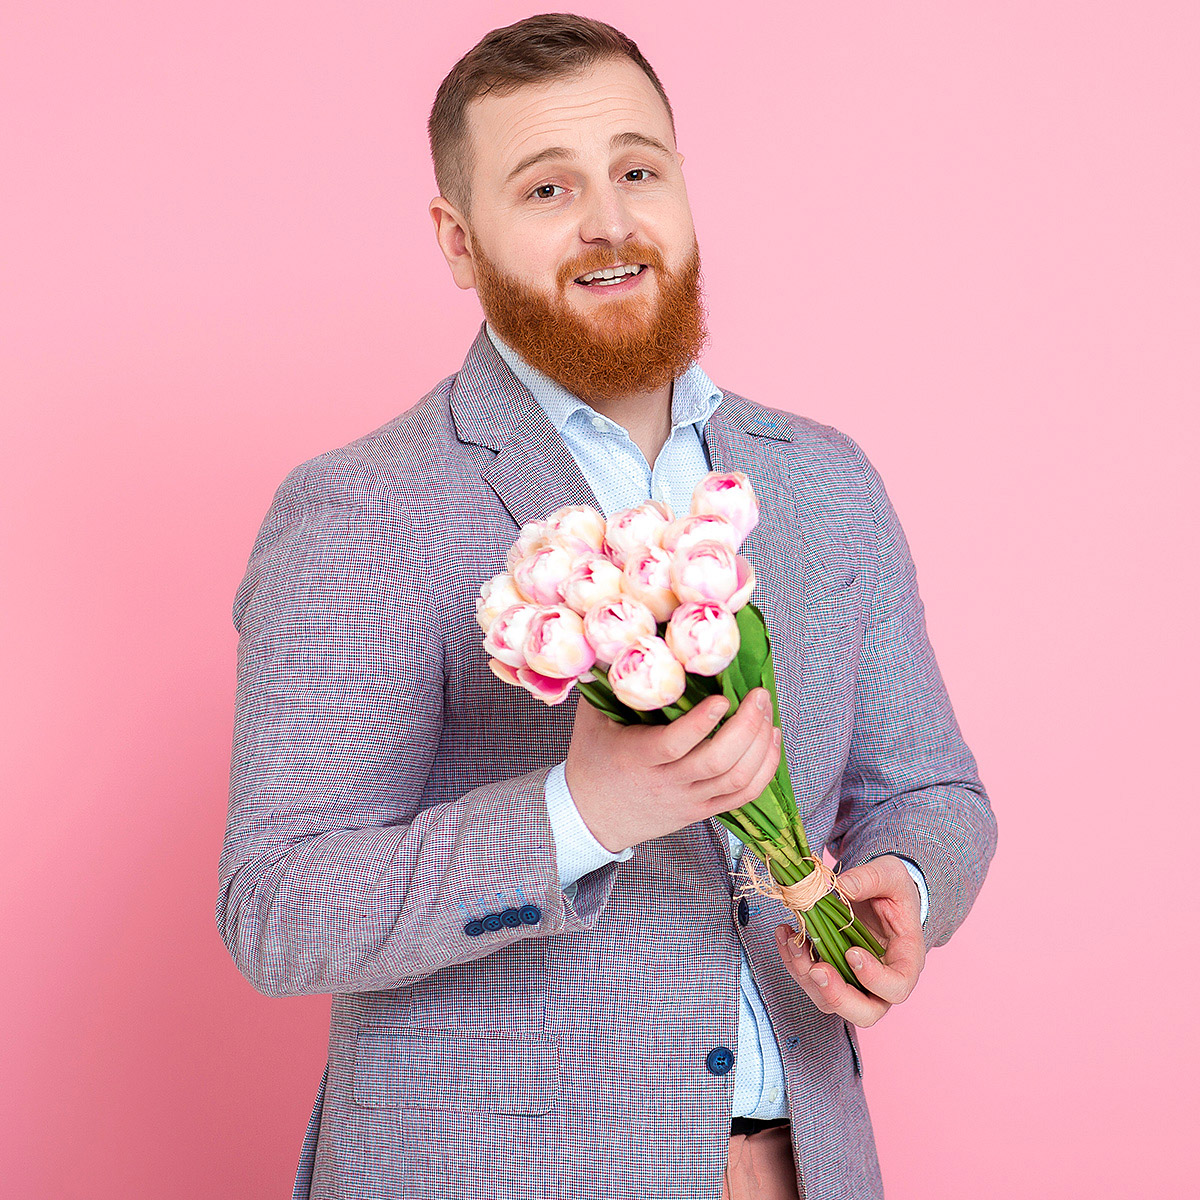 Handsome man with a bouquet of flowers